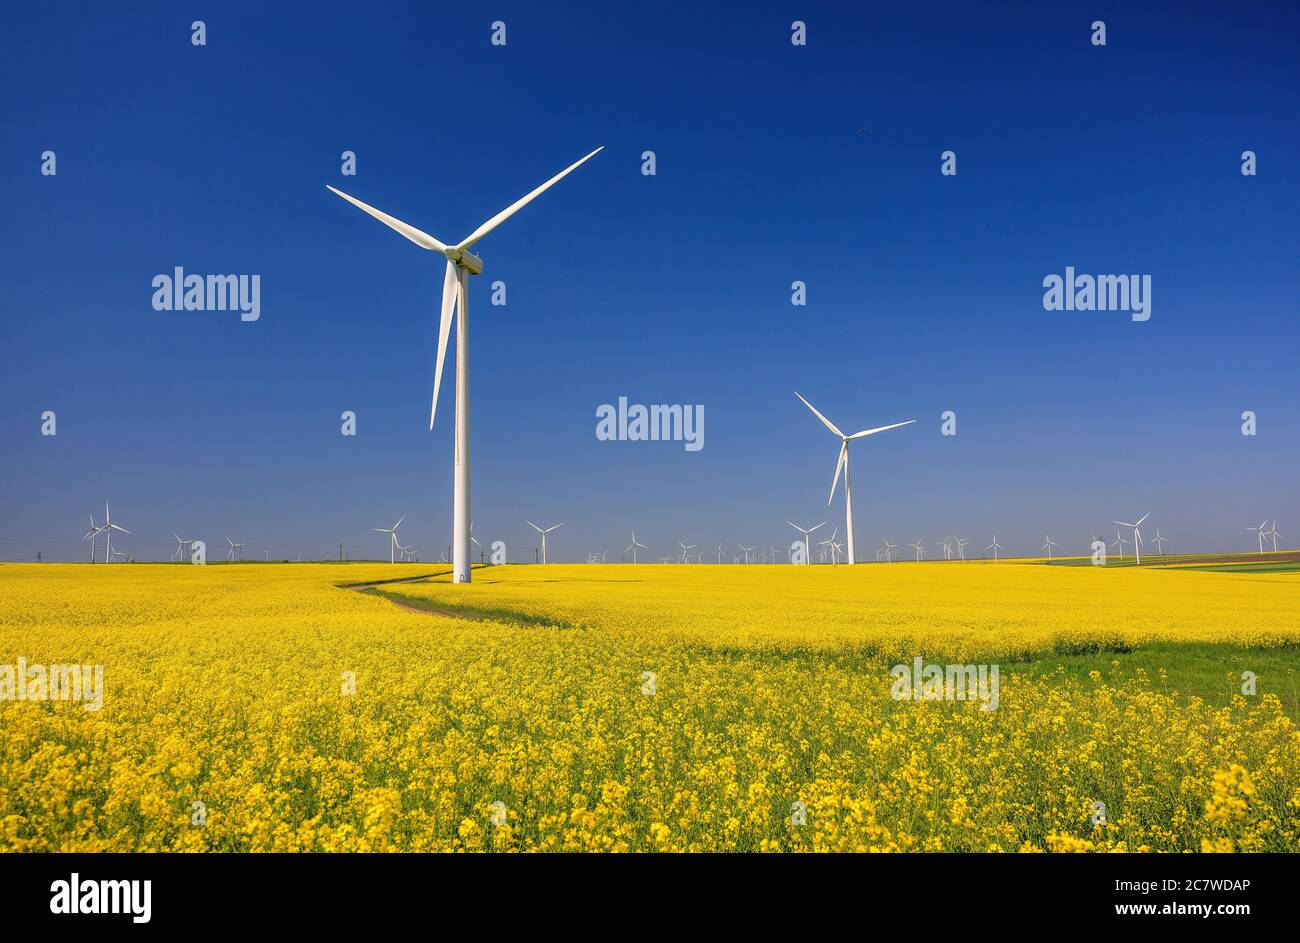 Wind farm and beautiful rapeseed flower in bloom with a clear blue sky. Lots of wind turbines in a field of blooming rapeseed. Windmill in Dogrogea Stock Photo